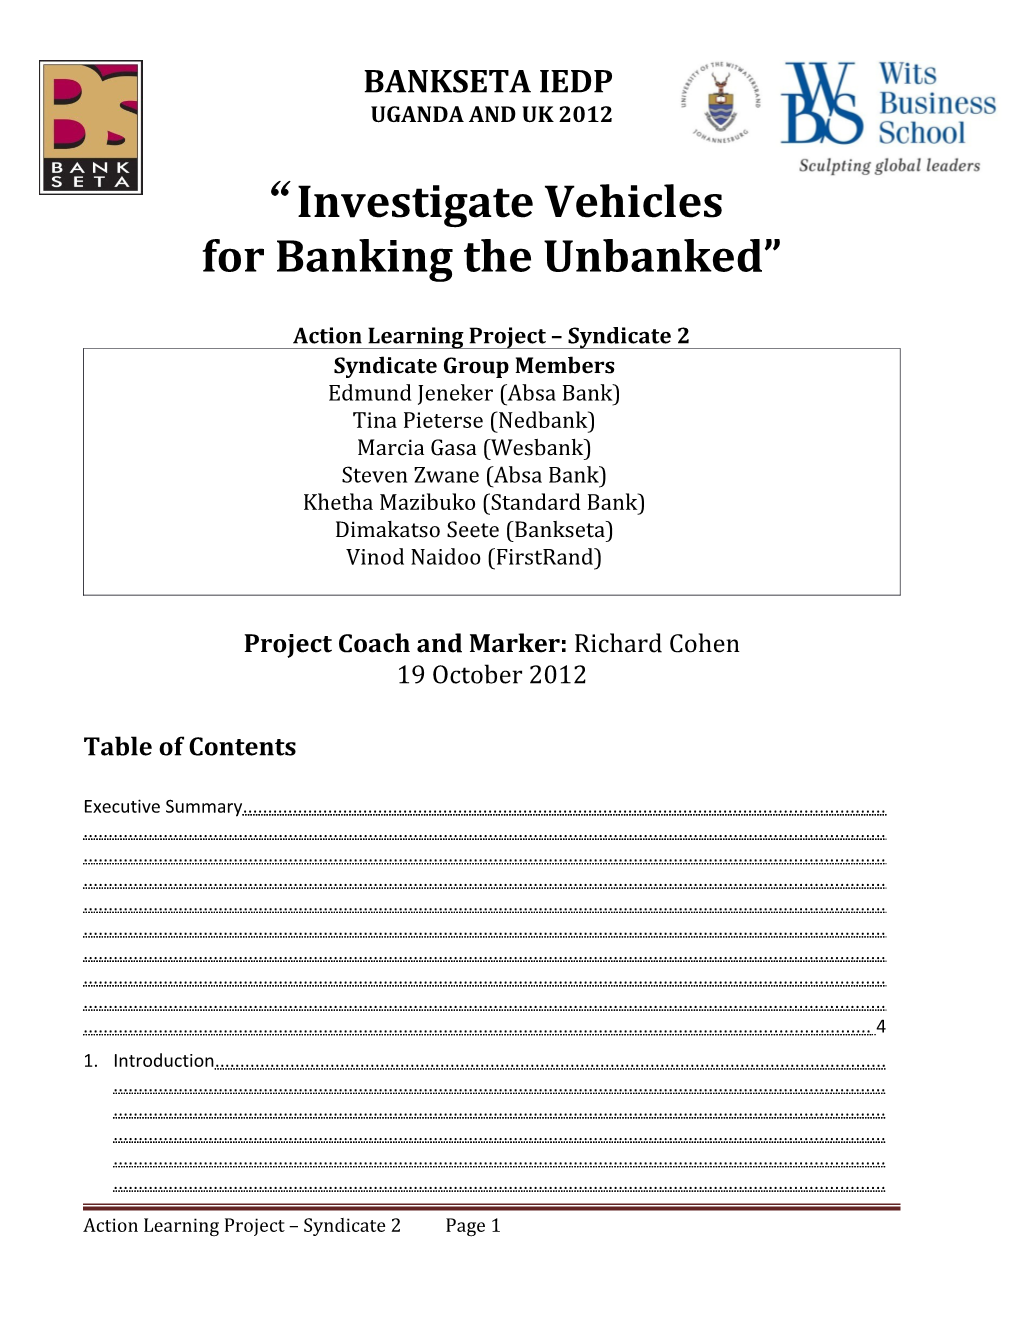 Investigate Vehicles for Banking the Unbanked